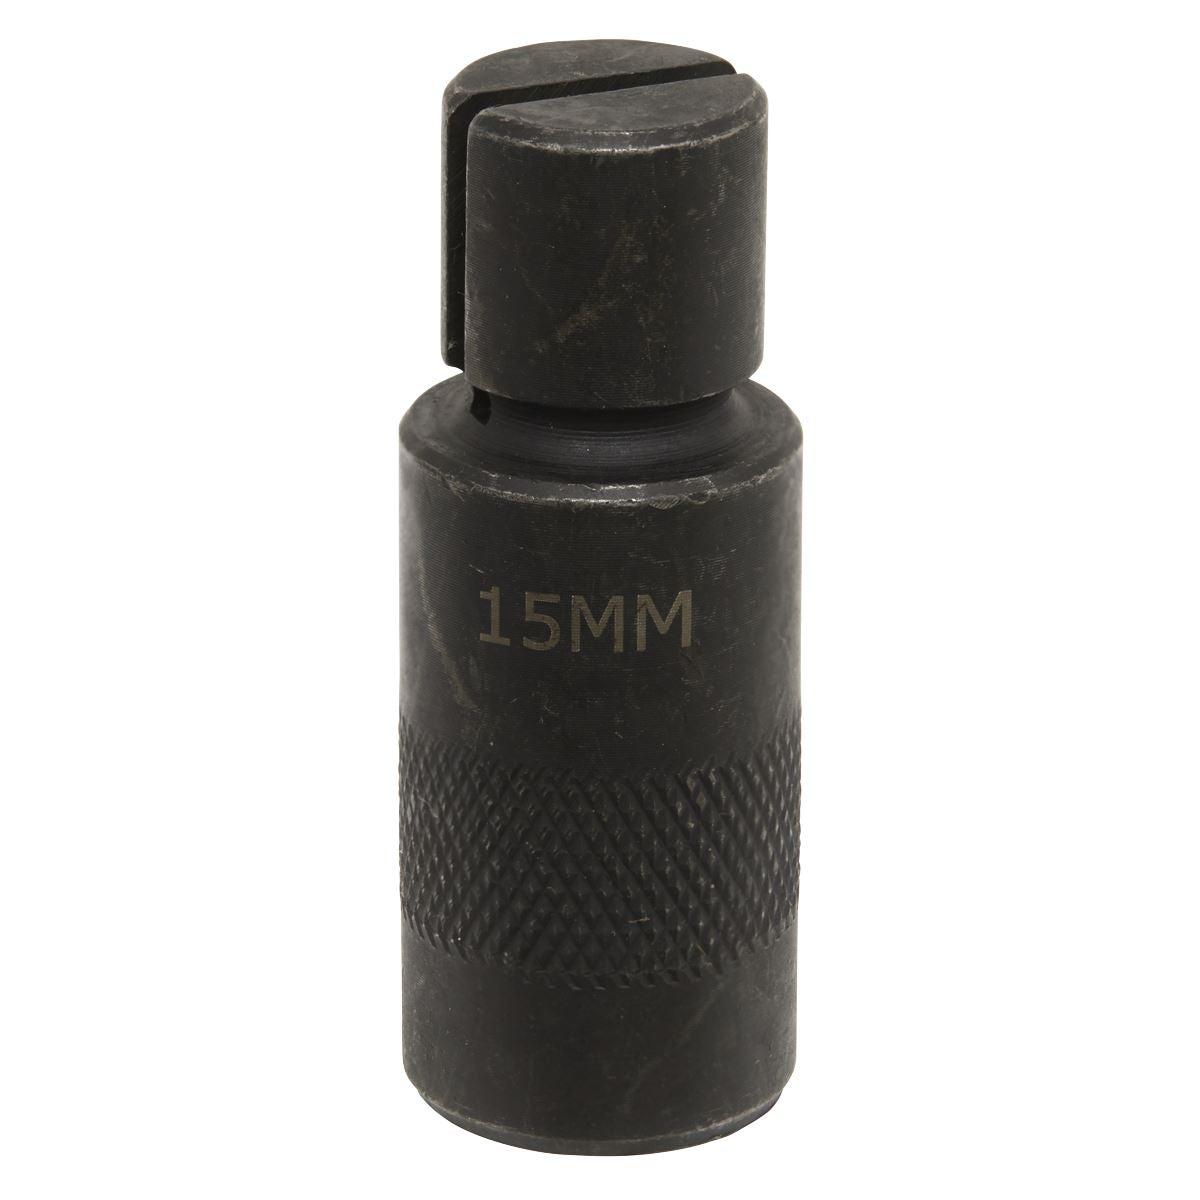 Sealey Replacement Collet for MS062 Ø15mm